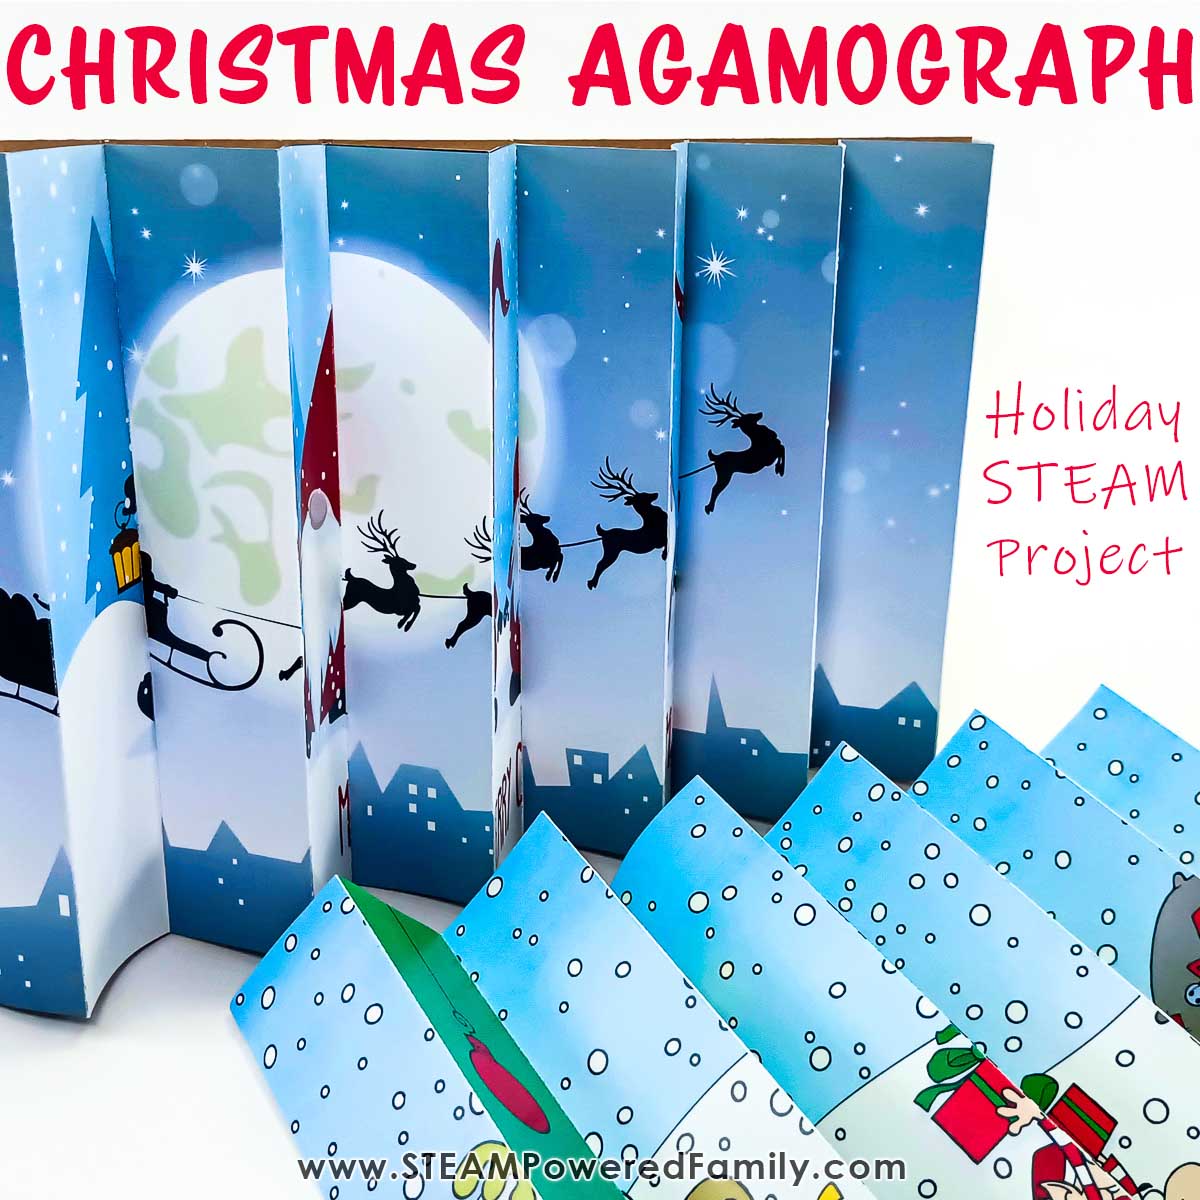 Christmas Agamograph STEAM Project